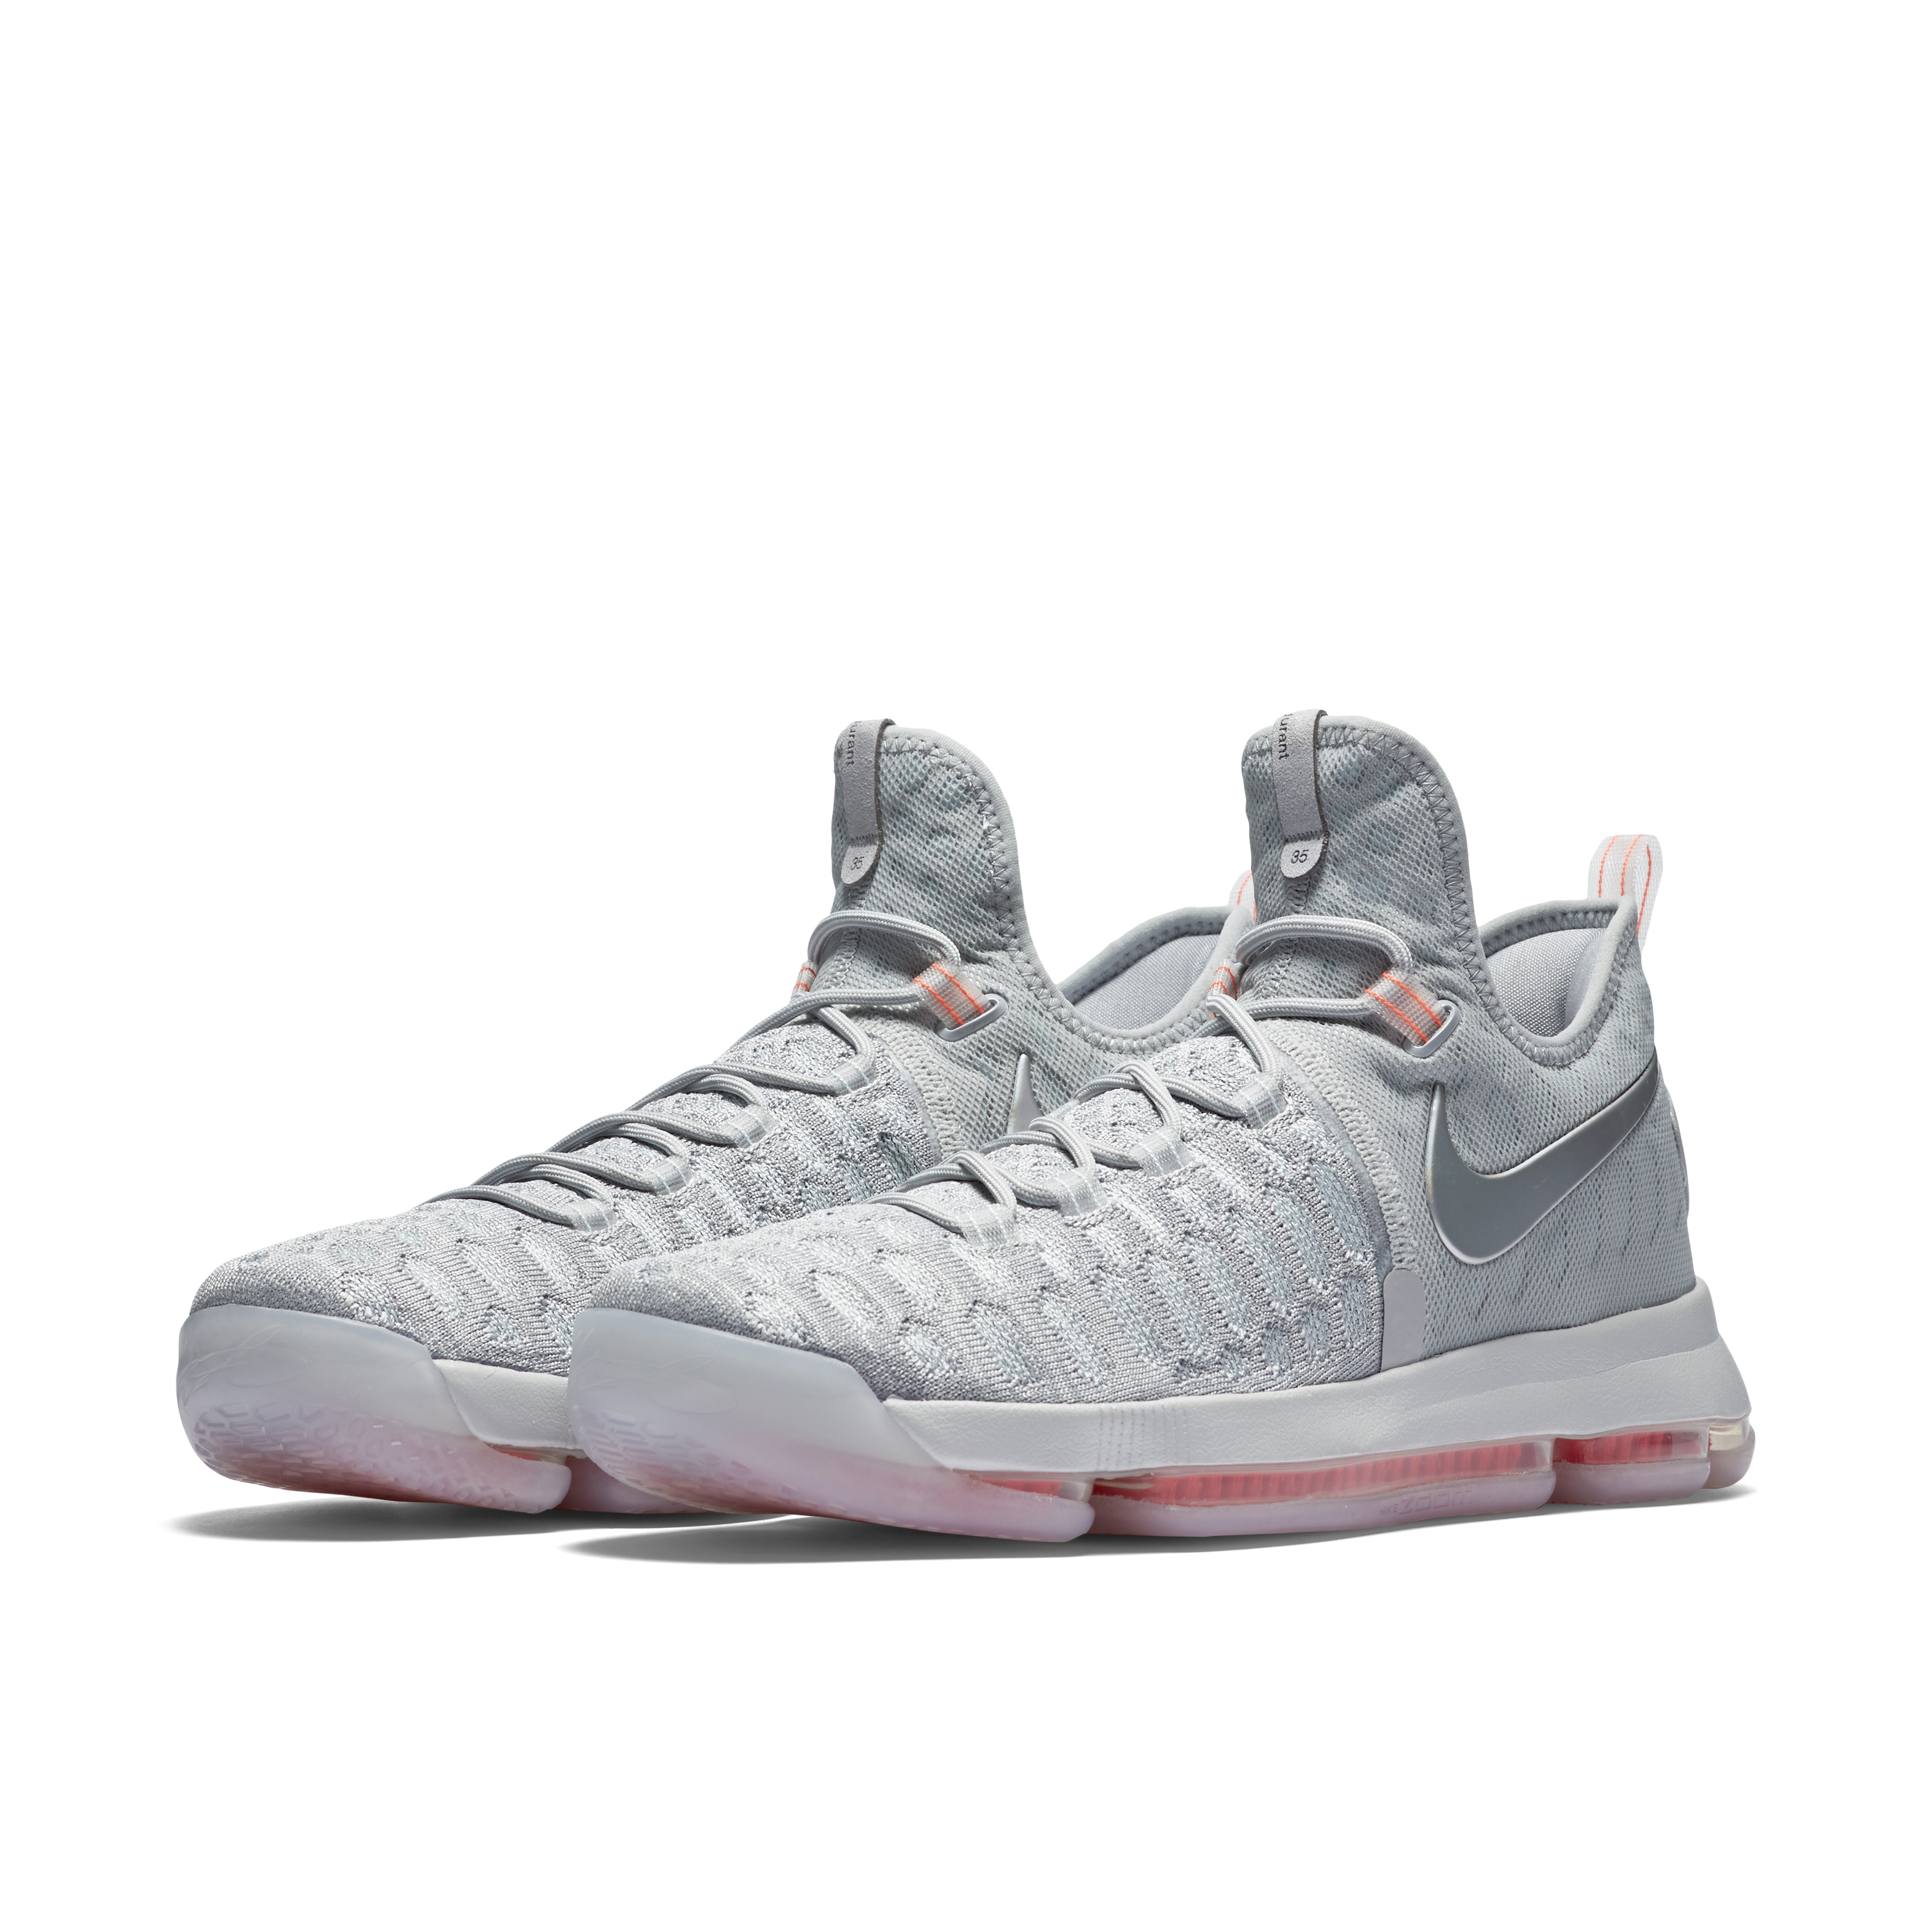 Nike KD9 Launch and Upcoming Colorways 